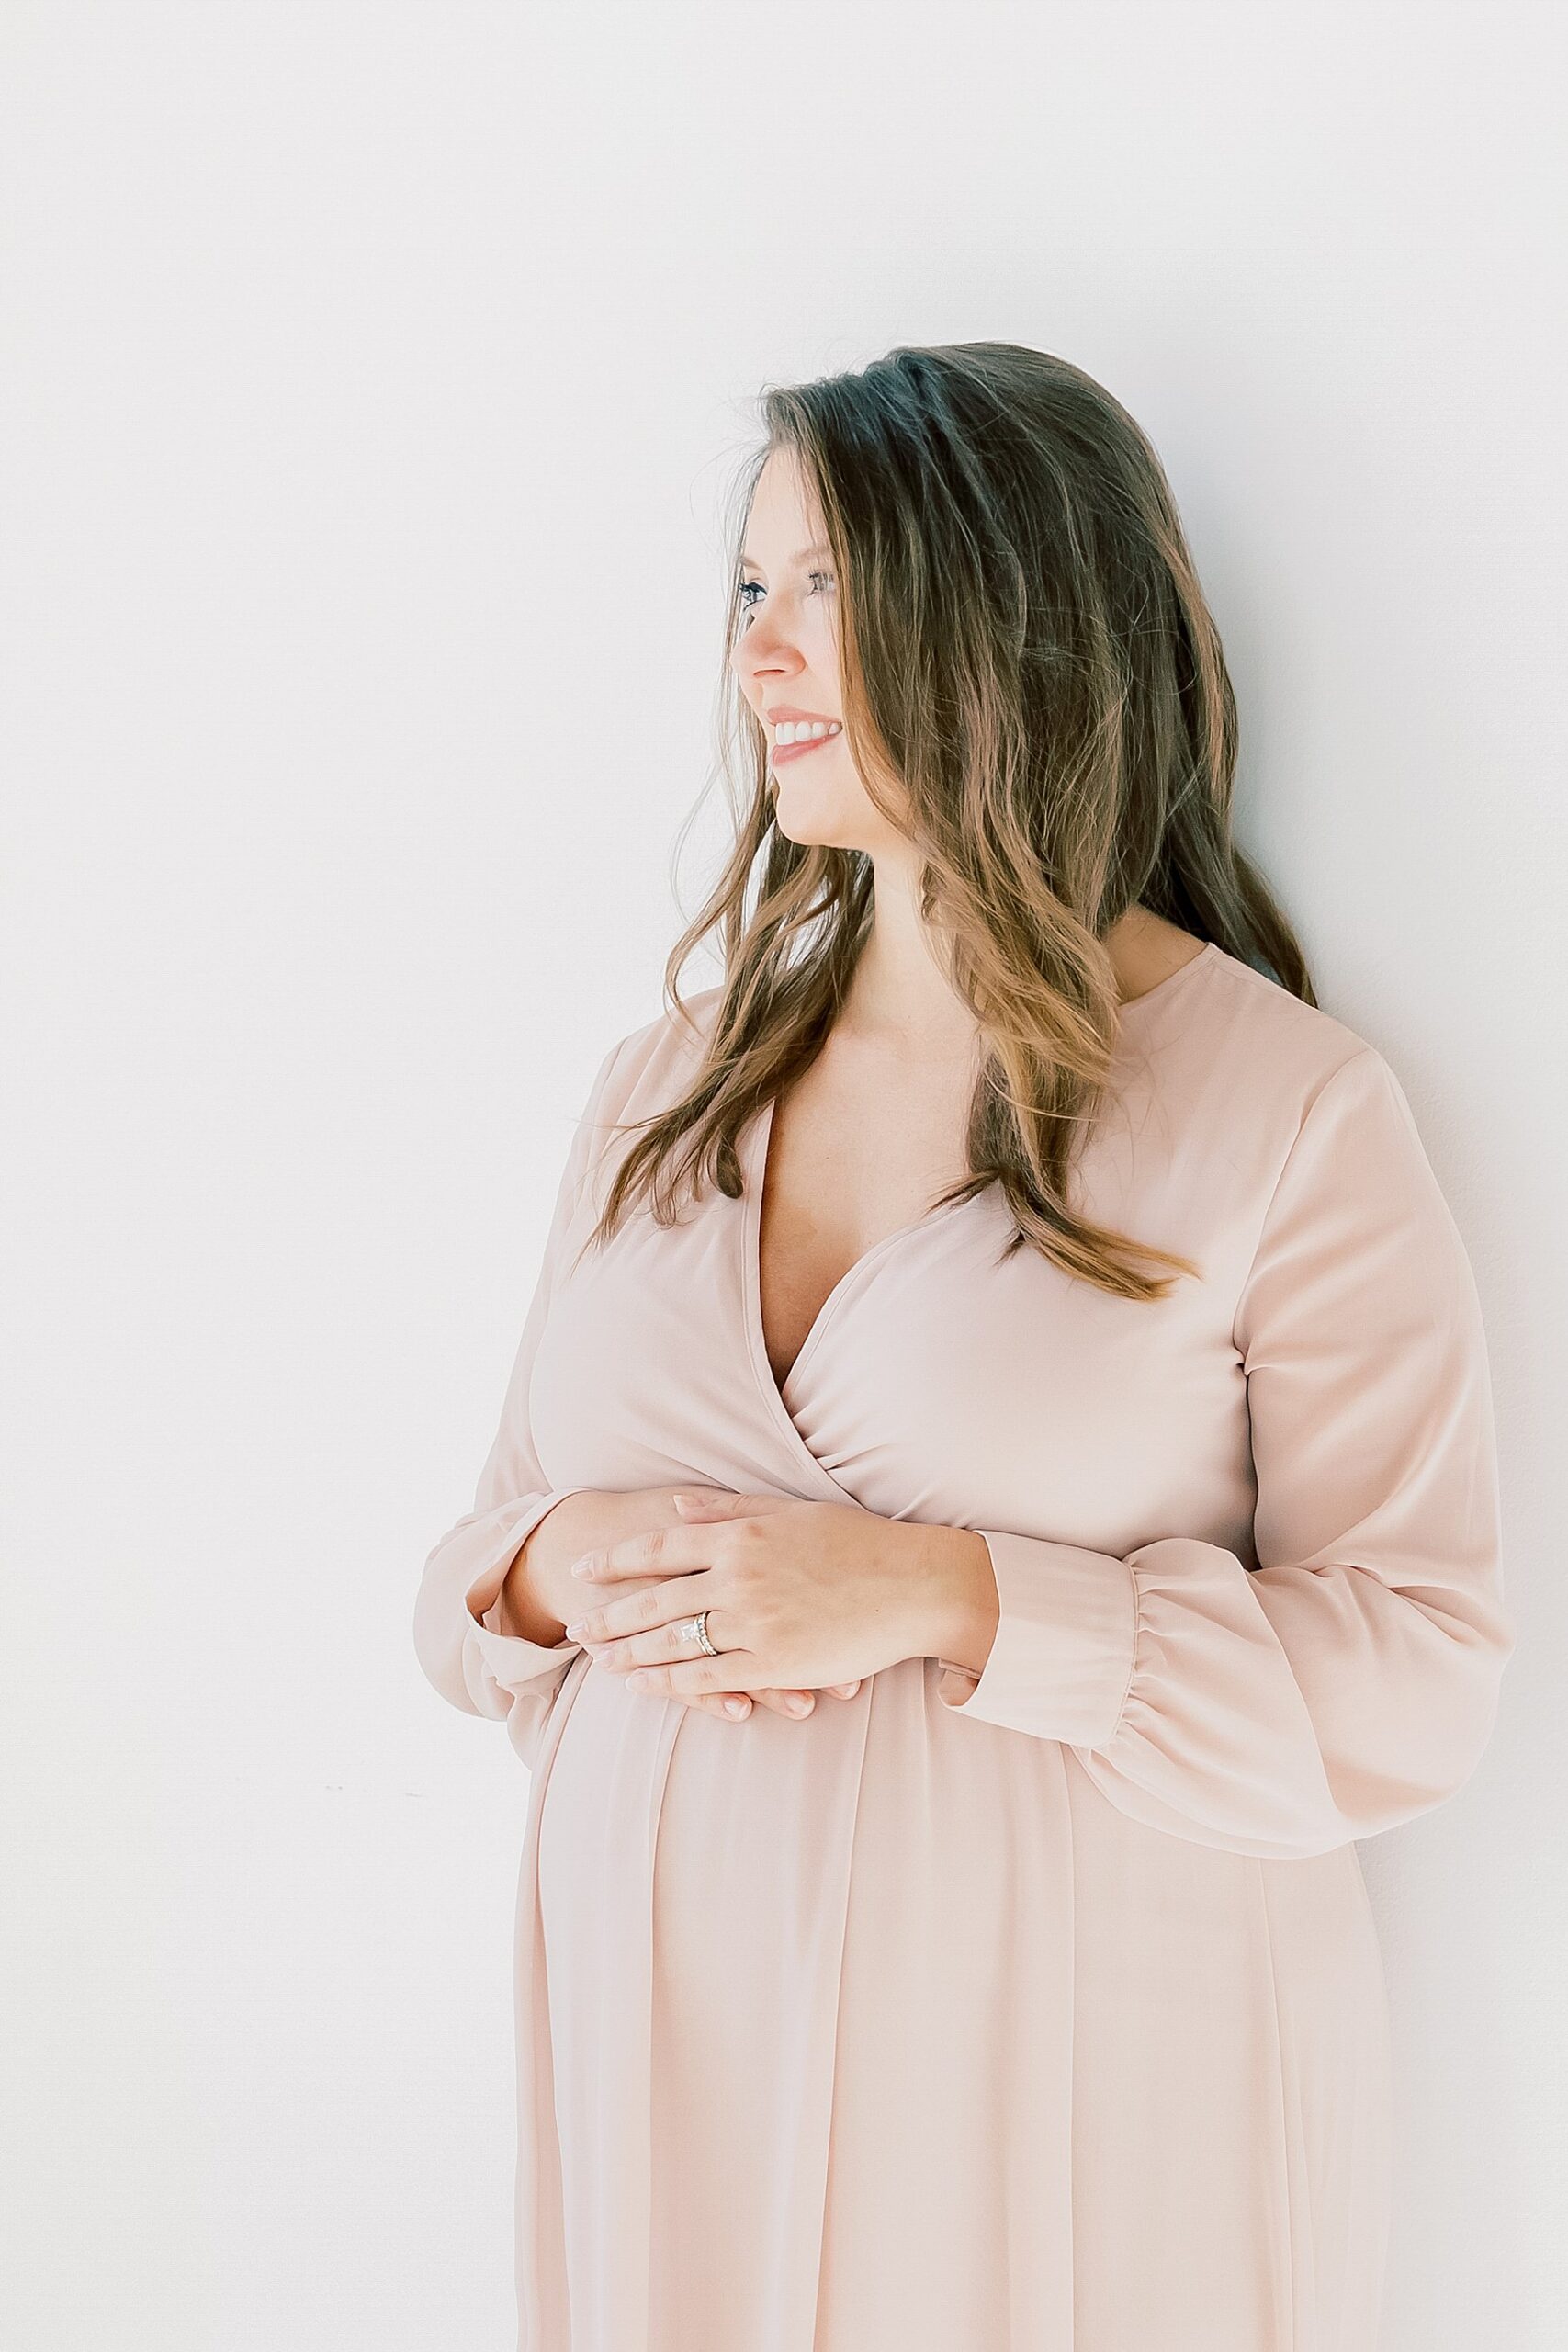 Maternity studio photography session in Charlotte NC by Katie Petrick Photography